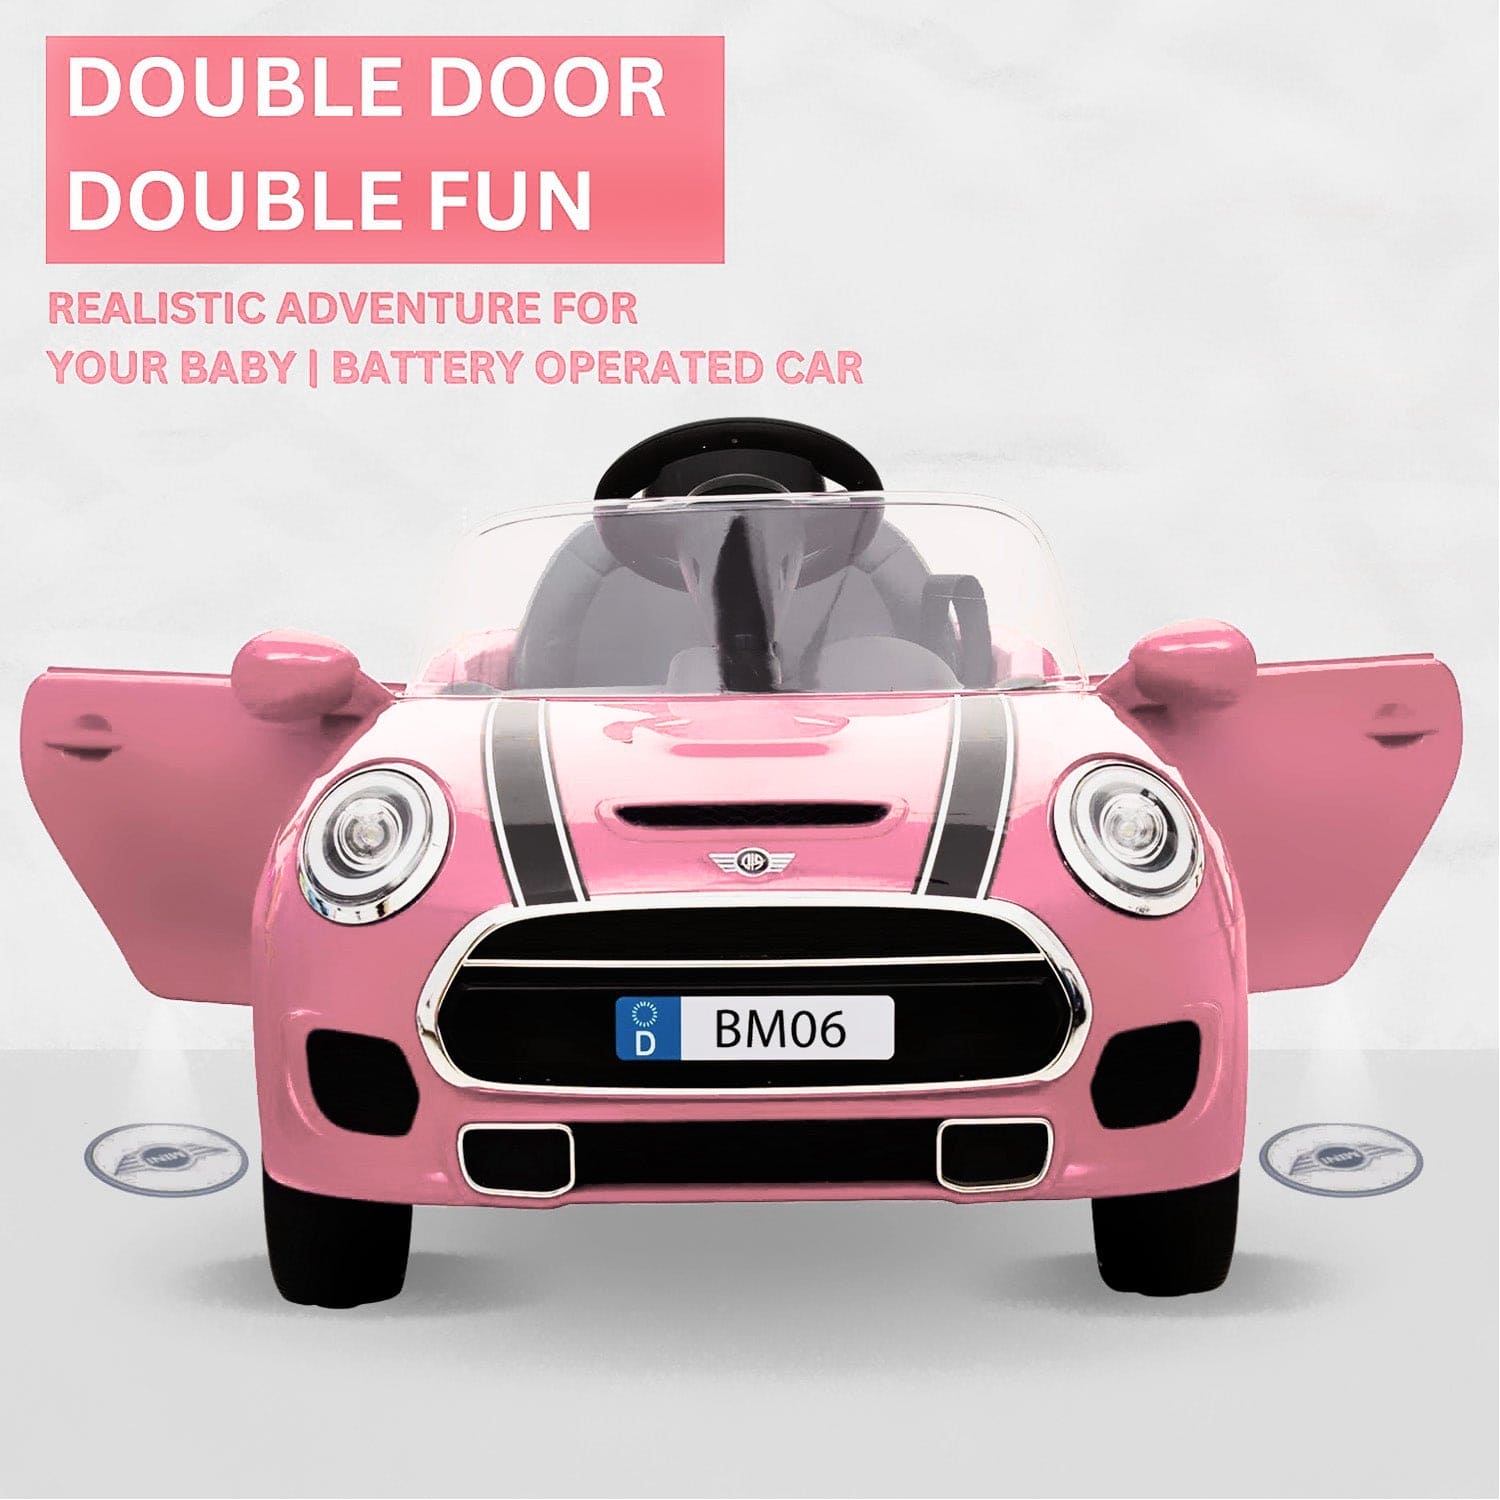 Baby Moo Mini Cooper Electric Ride-On Car for Kids | Rechargeable 12V Battery | Remote Control | USB MP3 Player | Ages 1-5 - Pink